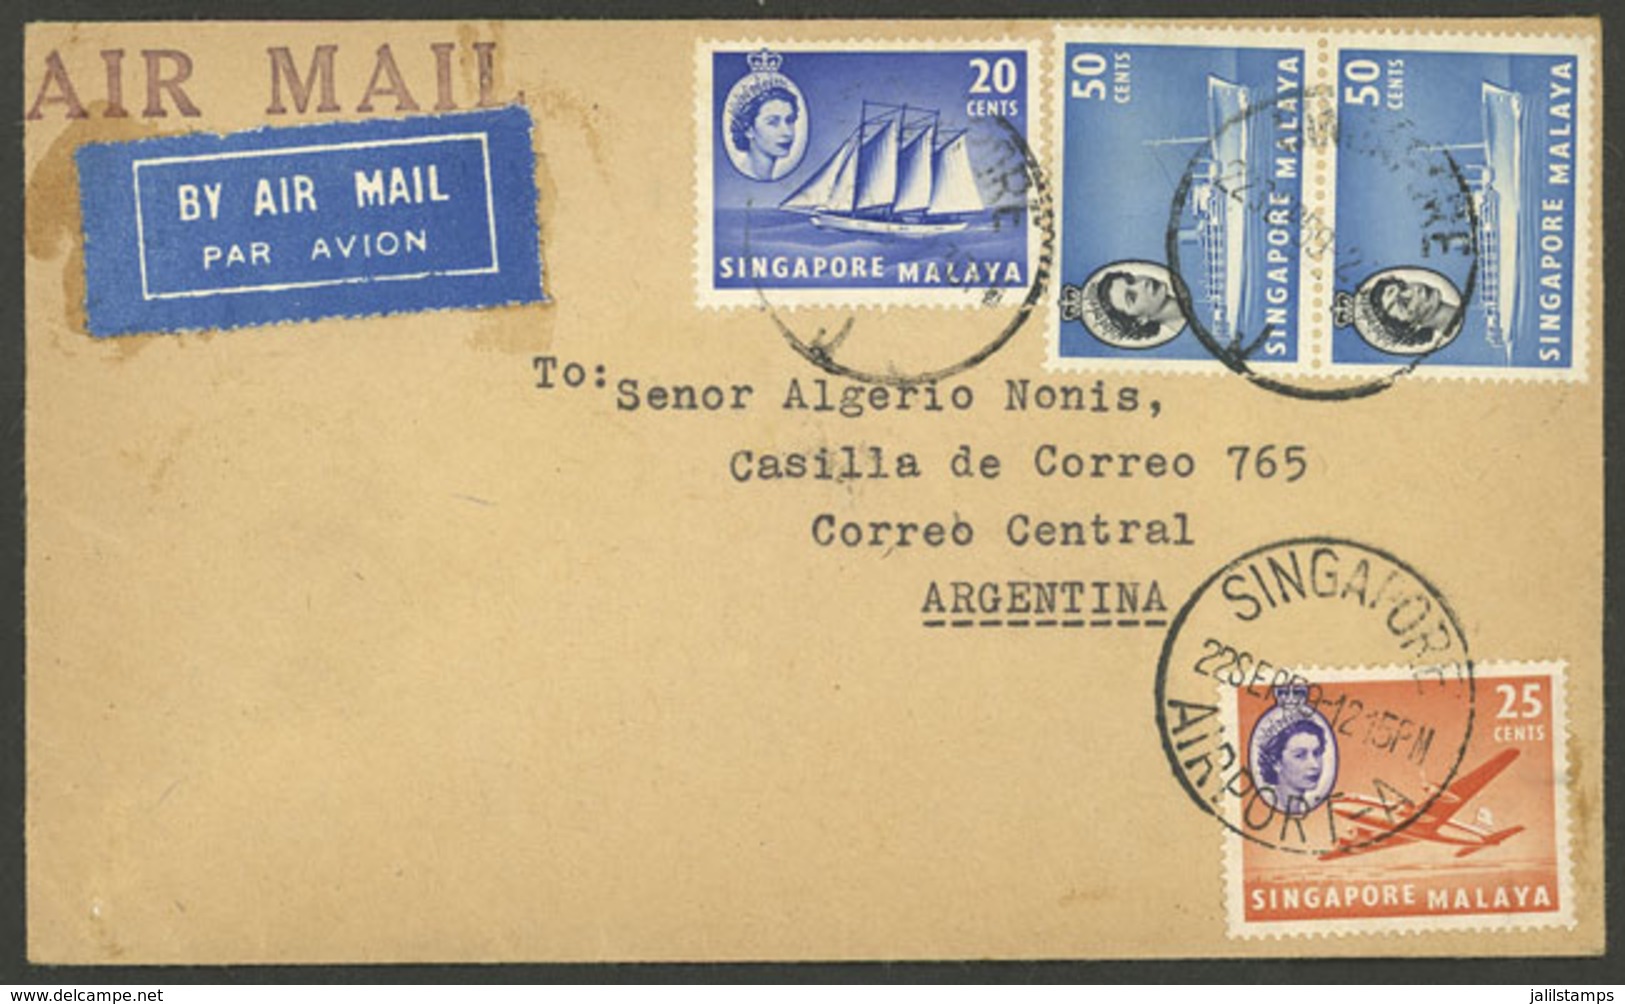 SINGAPORE: Airmail Cover Sent To Argentina On 22/SE/1959 With Nice Franking! - Singapore (1959-...)